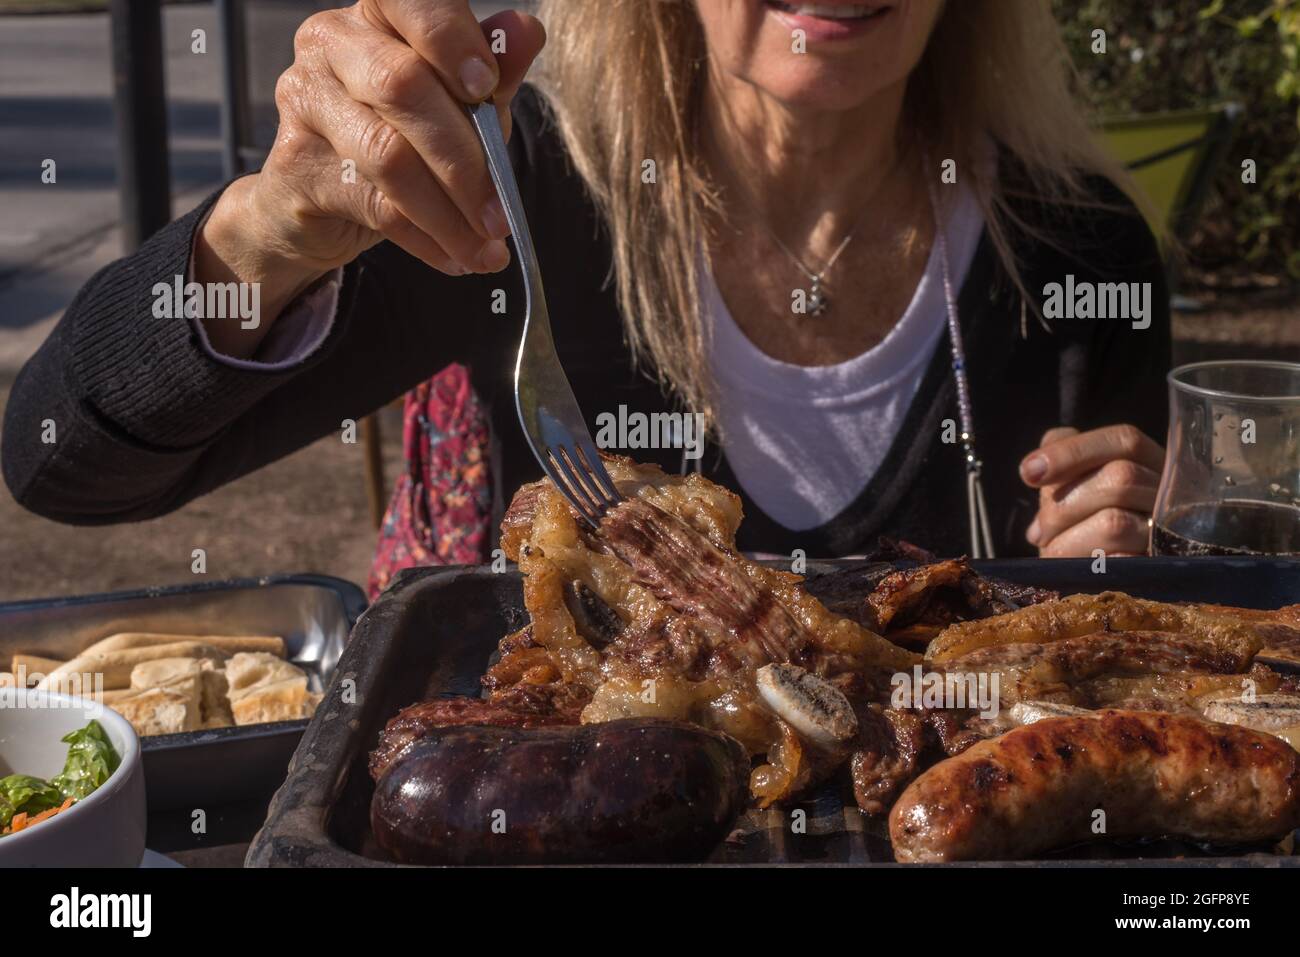 Adult woman skewering a beef grill with fork from an Argentinian barbecue. Horizontal photograph. Stock Photo